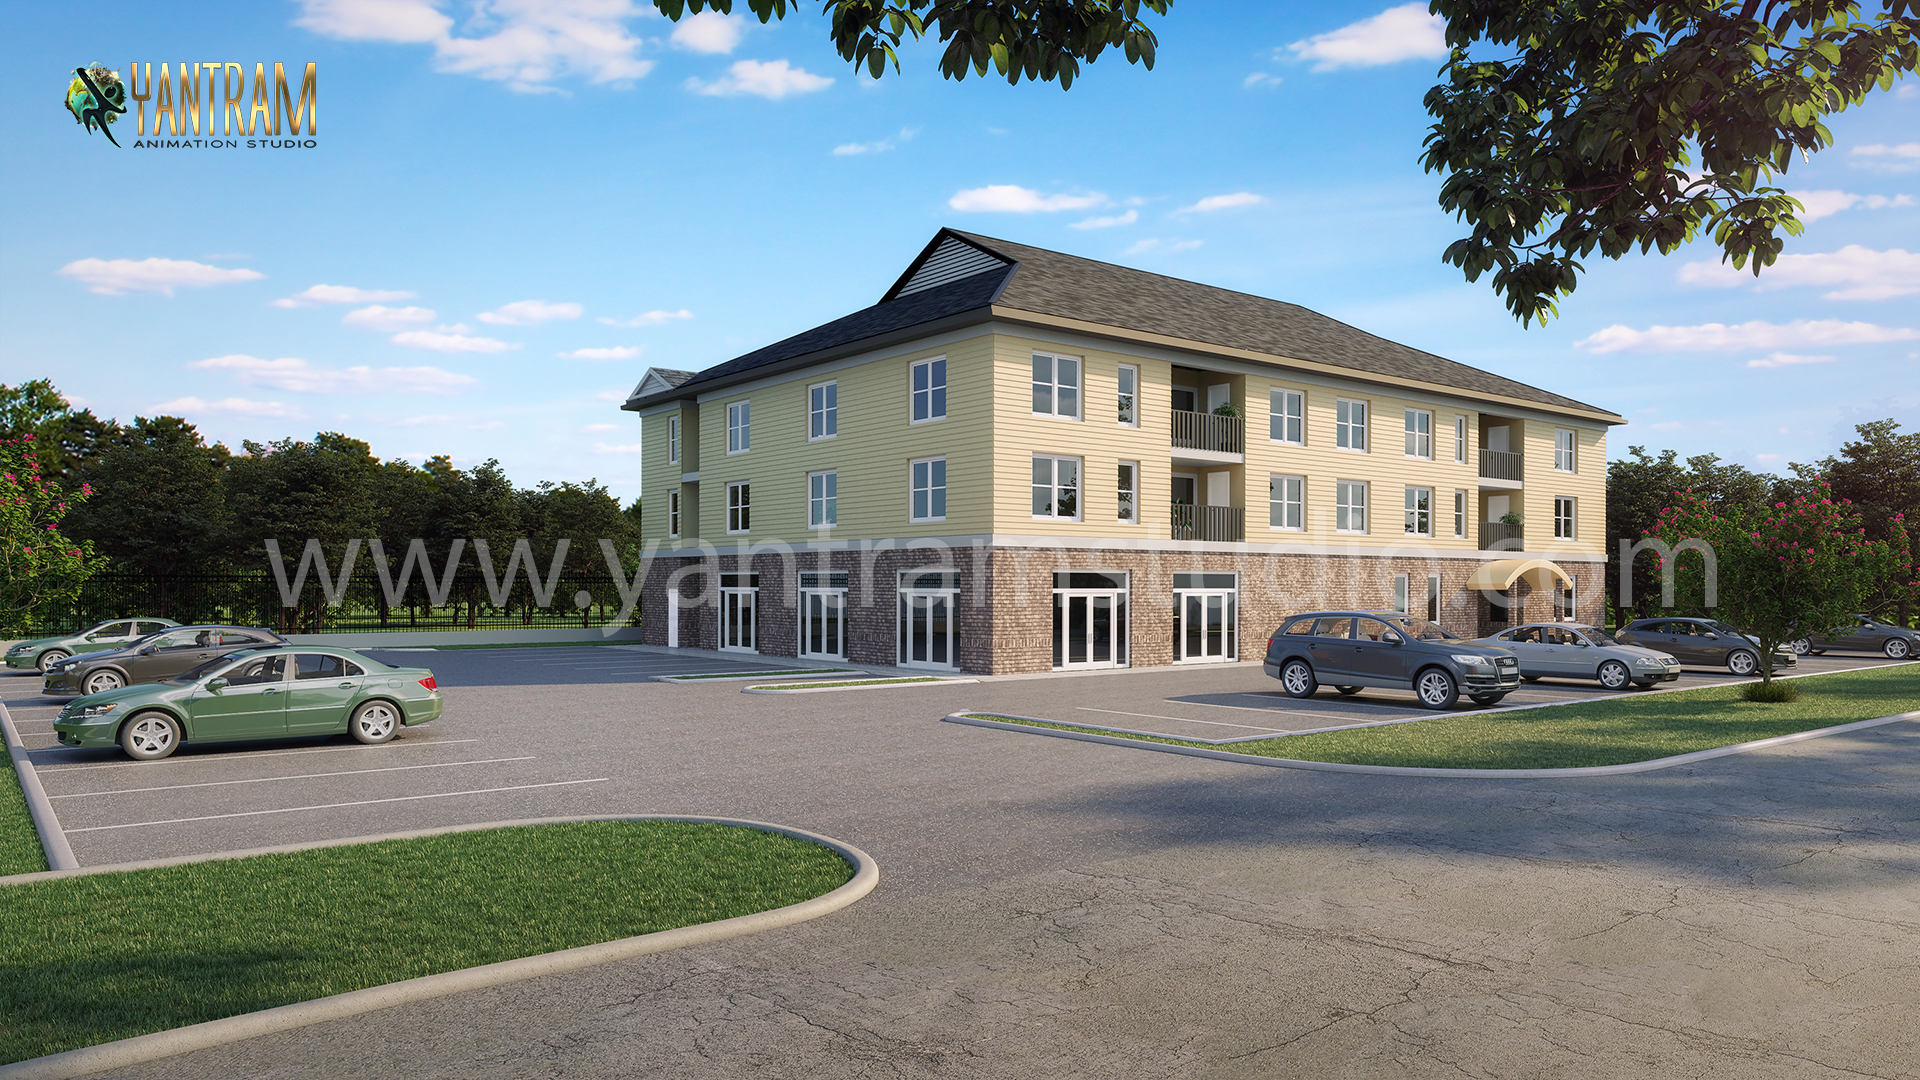 3d architectural rendering exterior view of residence building by Yantram architectural rendering company 2021, Fort Worth – Texas